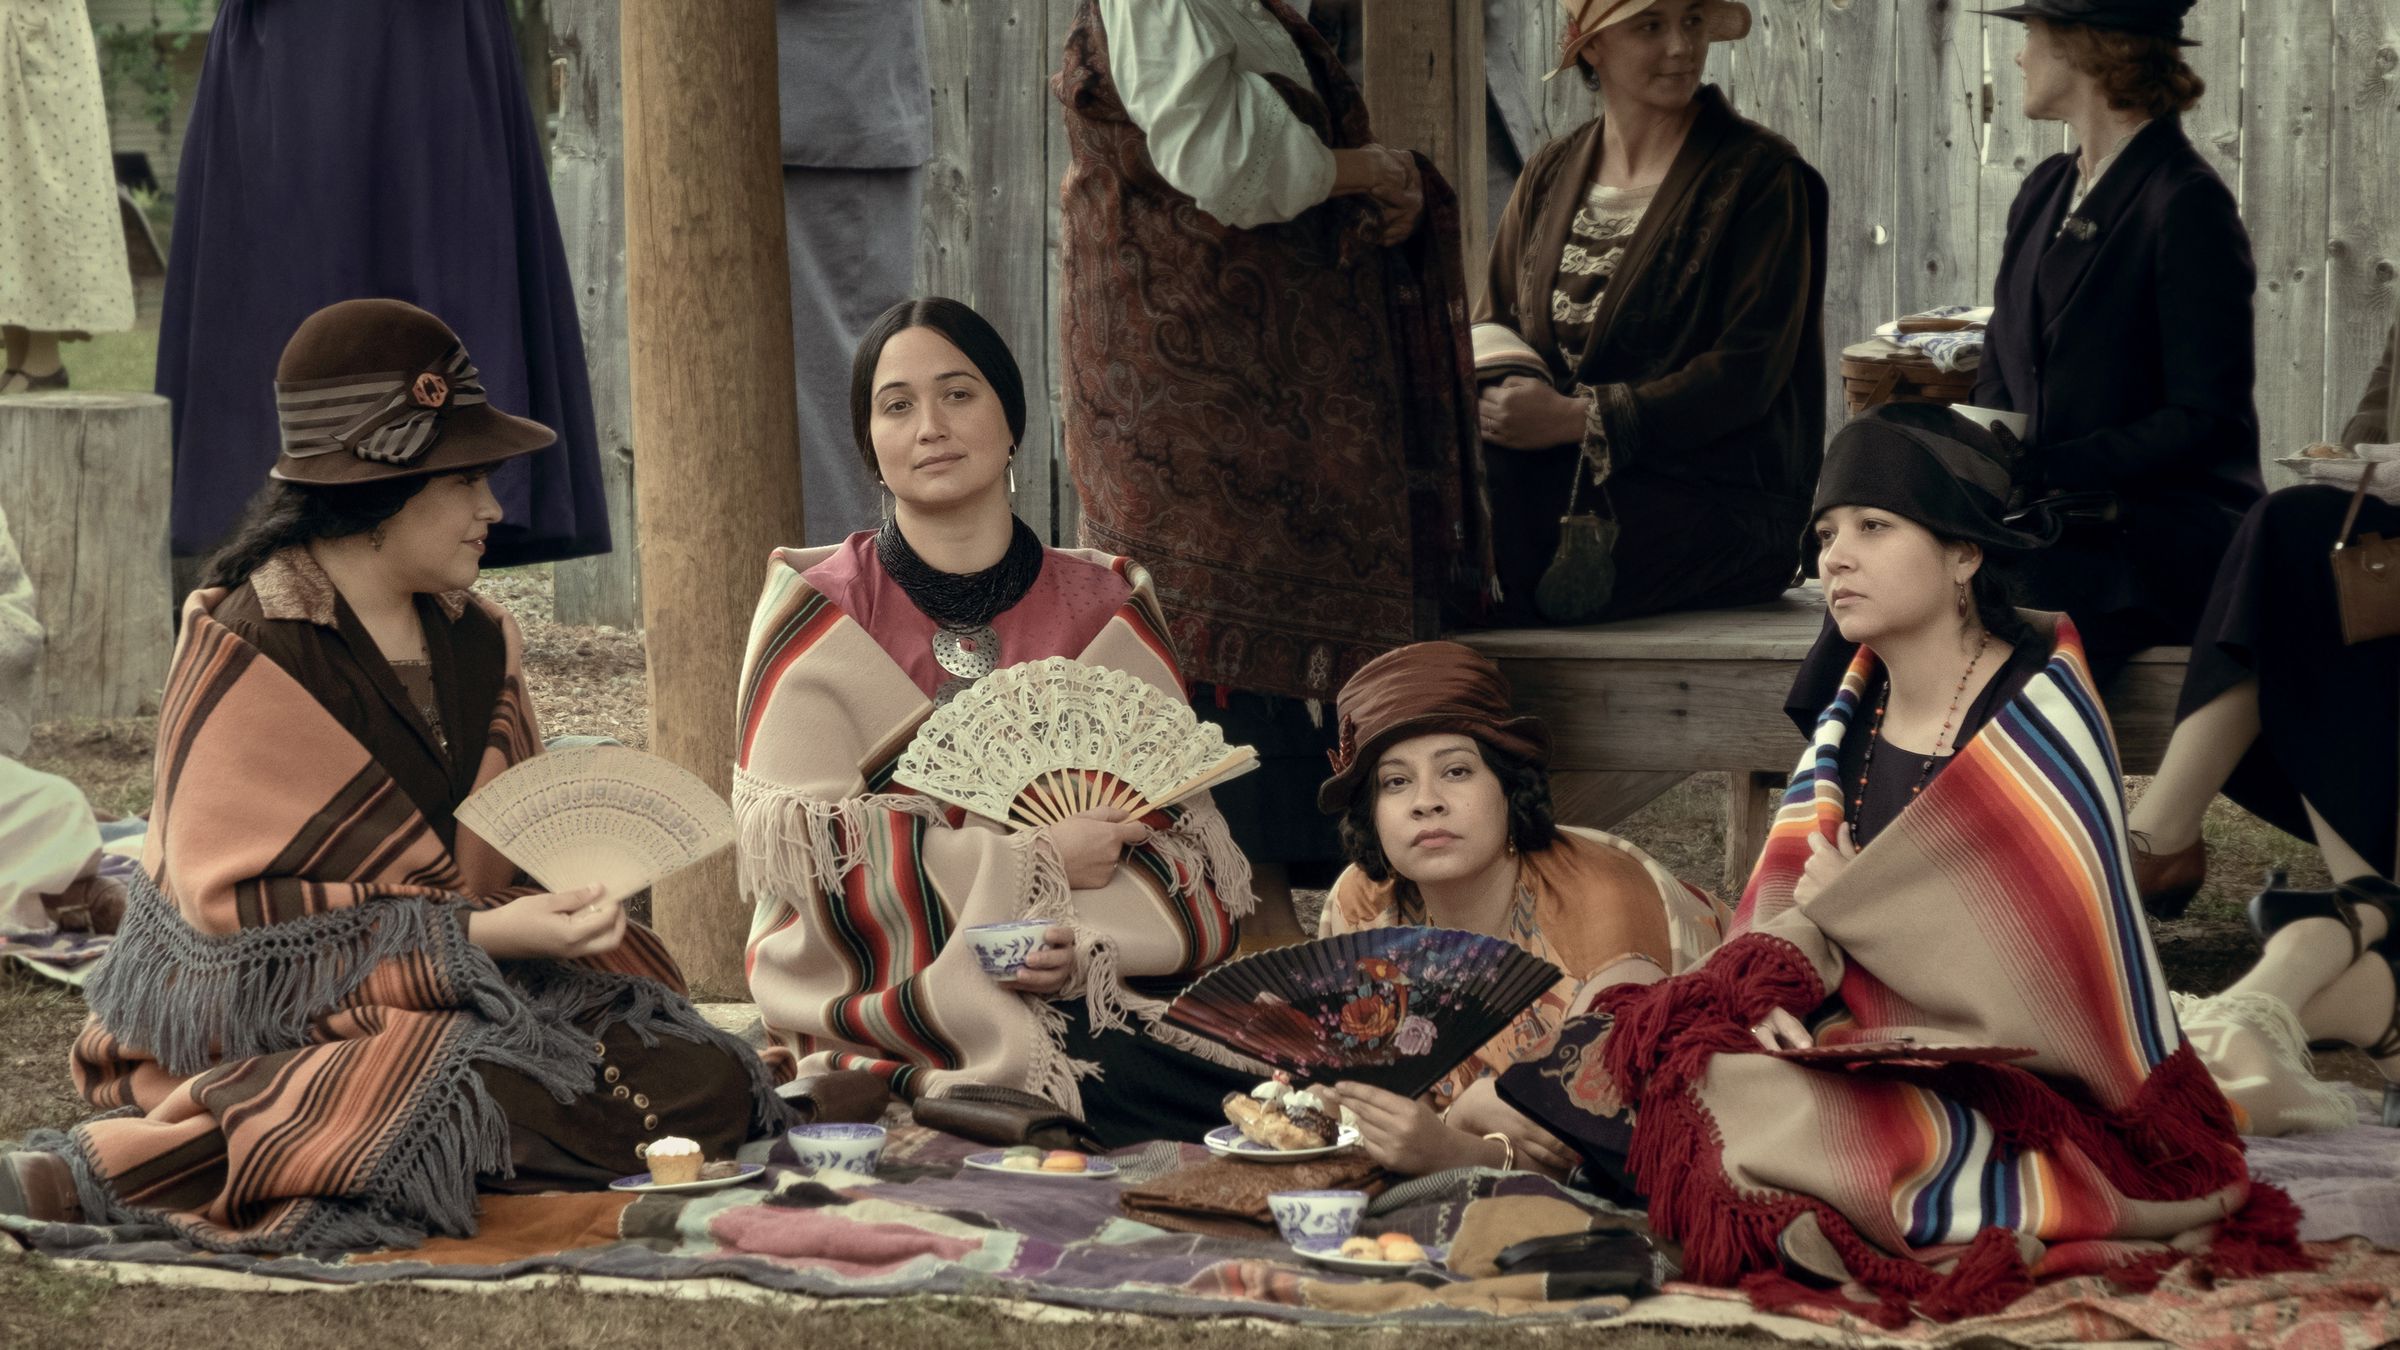 A group of four Native American women sitting together on the ground in front of a store while they fan themselves and enjoy pastries.